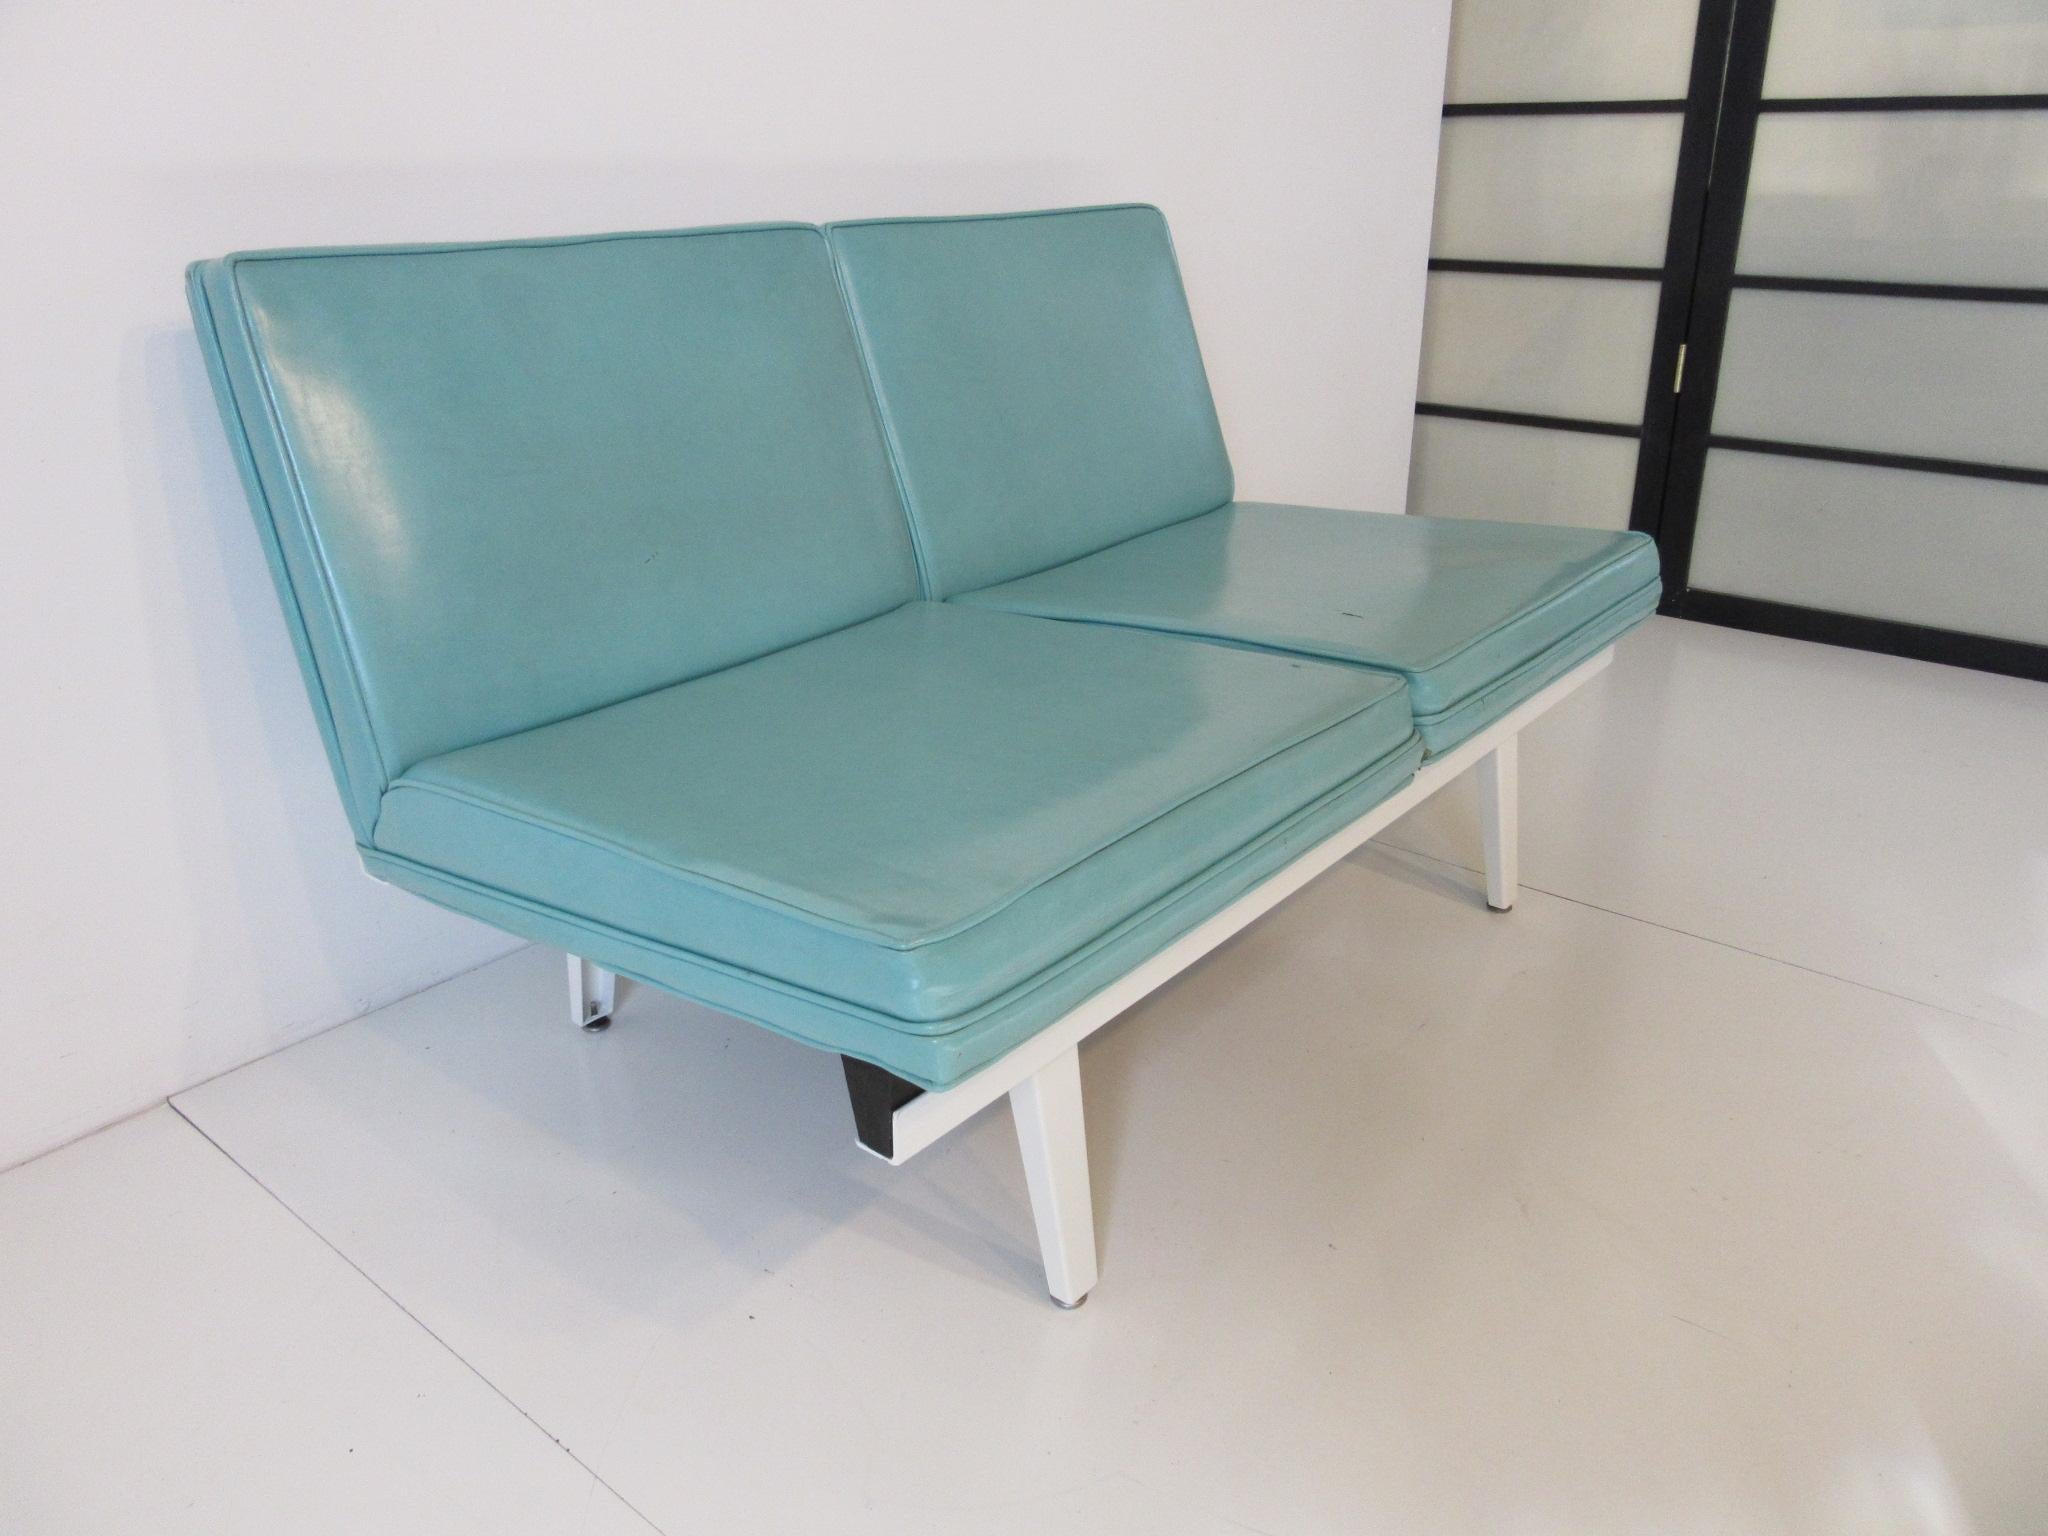 A Nelson designed steel framed love seat - sofa lounge unit with white metal frame , Rubber and metal foot pads and two turquoise Naugahyde seats . A classic design that is still fresh from the early 1950's manufactured by the Herman Miller